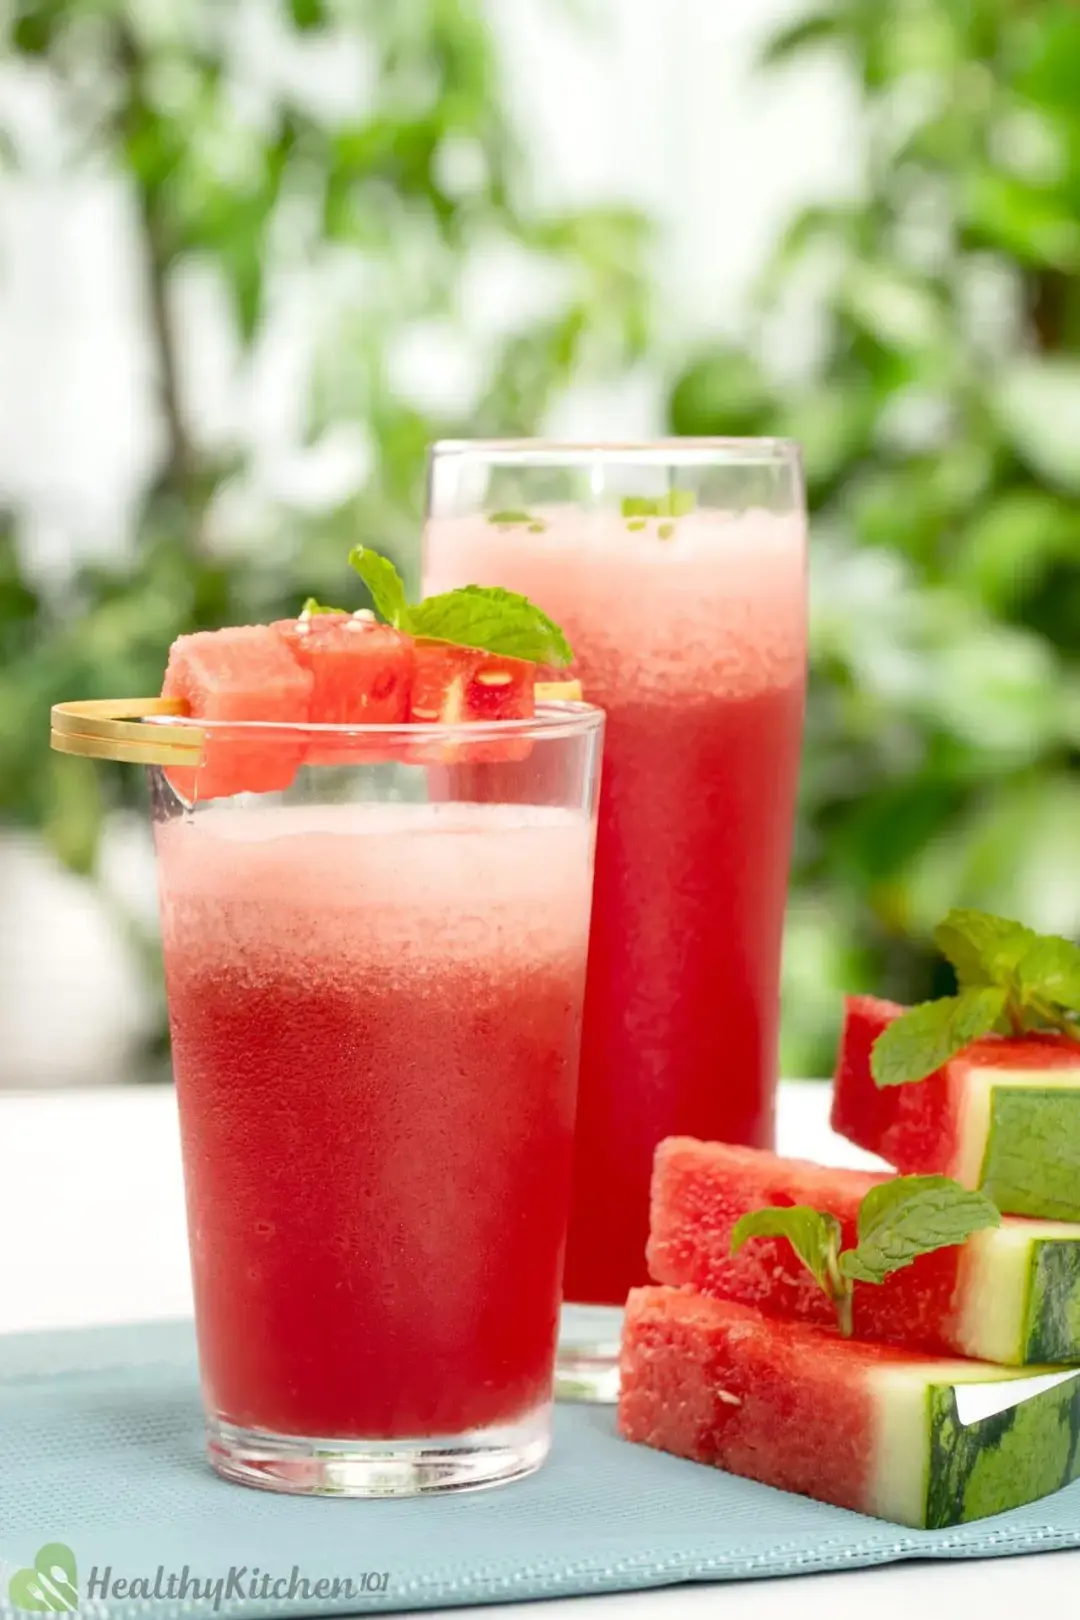 Two glasses of watermelon smoothie with watermelon cubes on top next to three slices of watermelon on a blue cloth